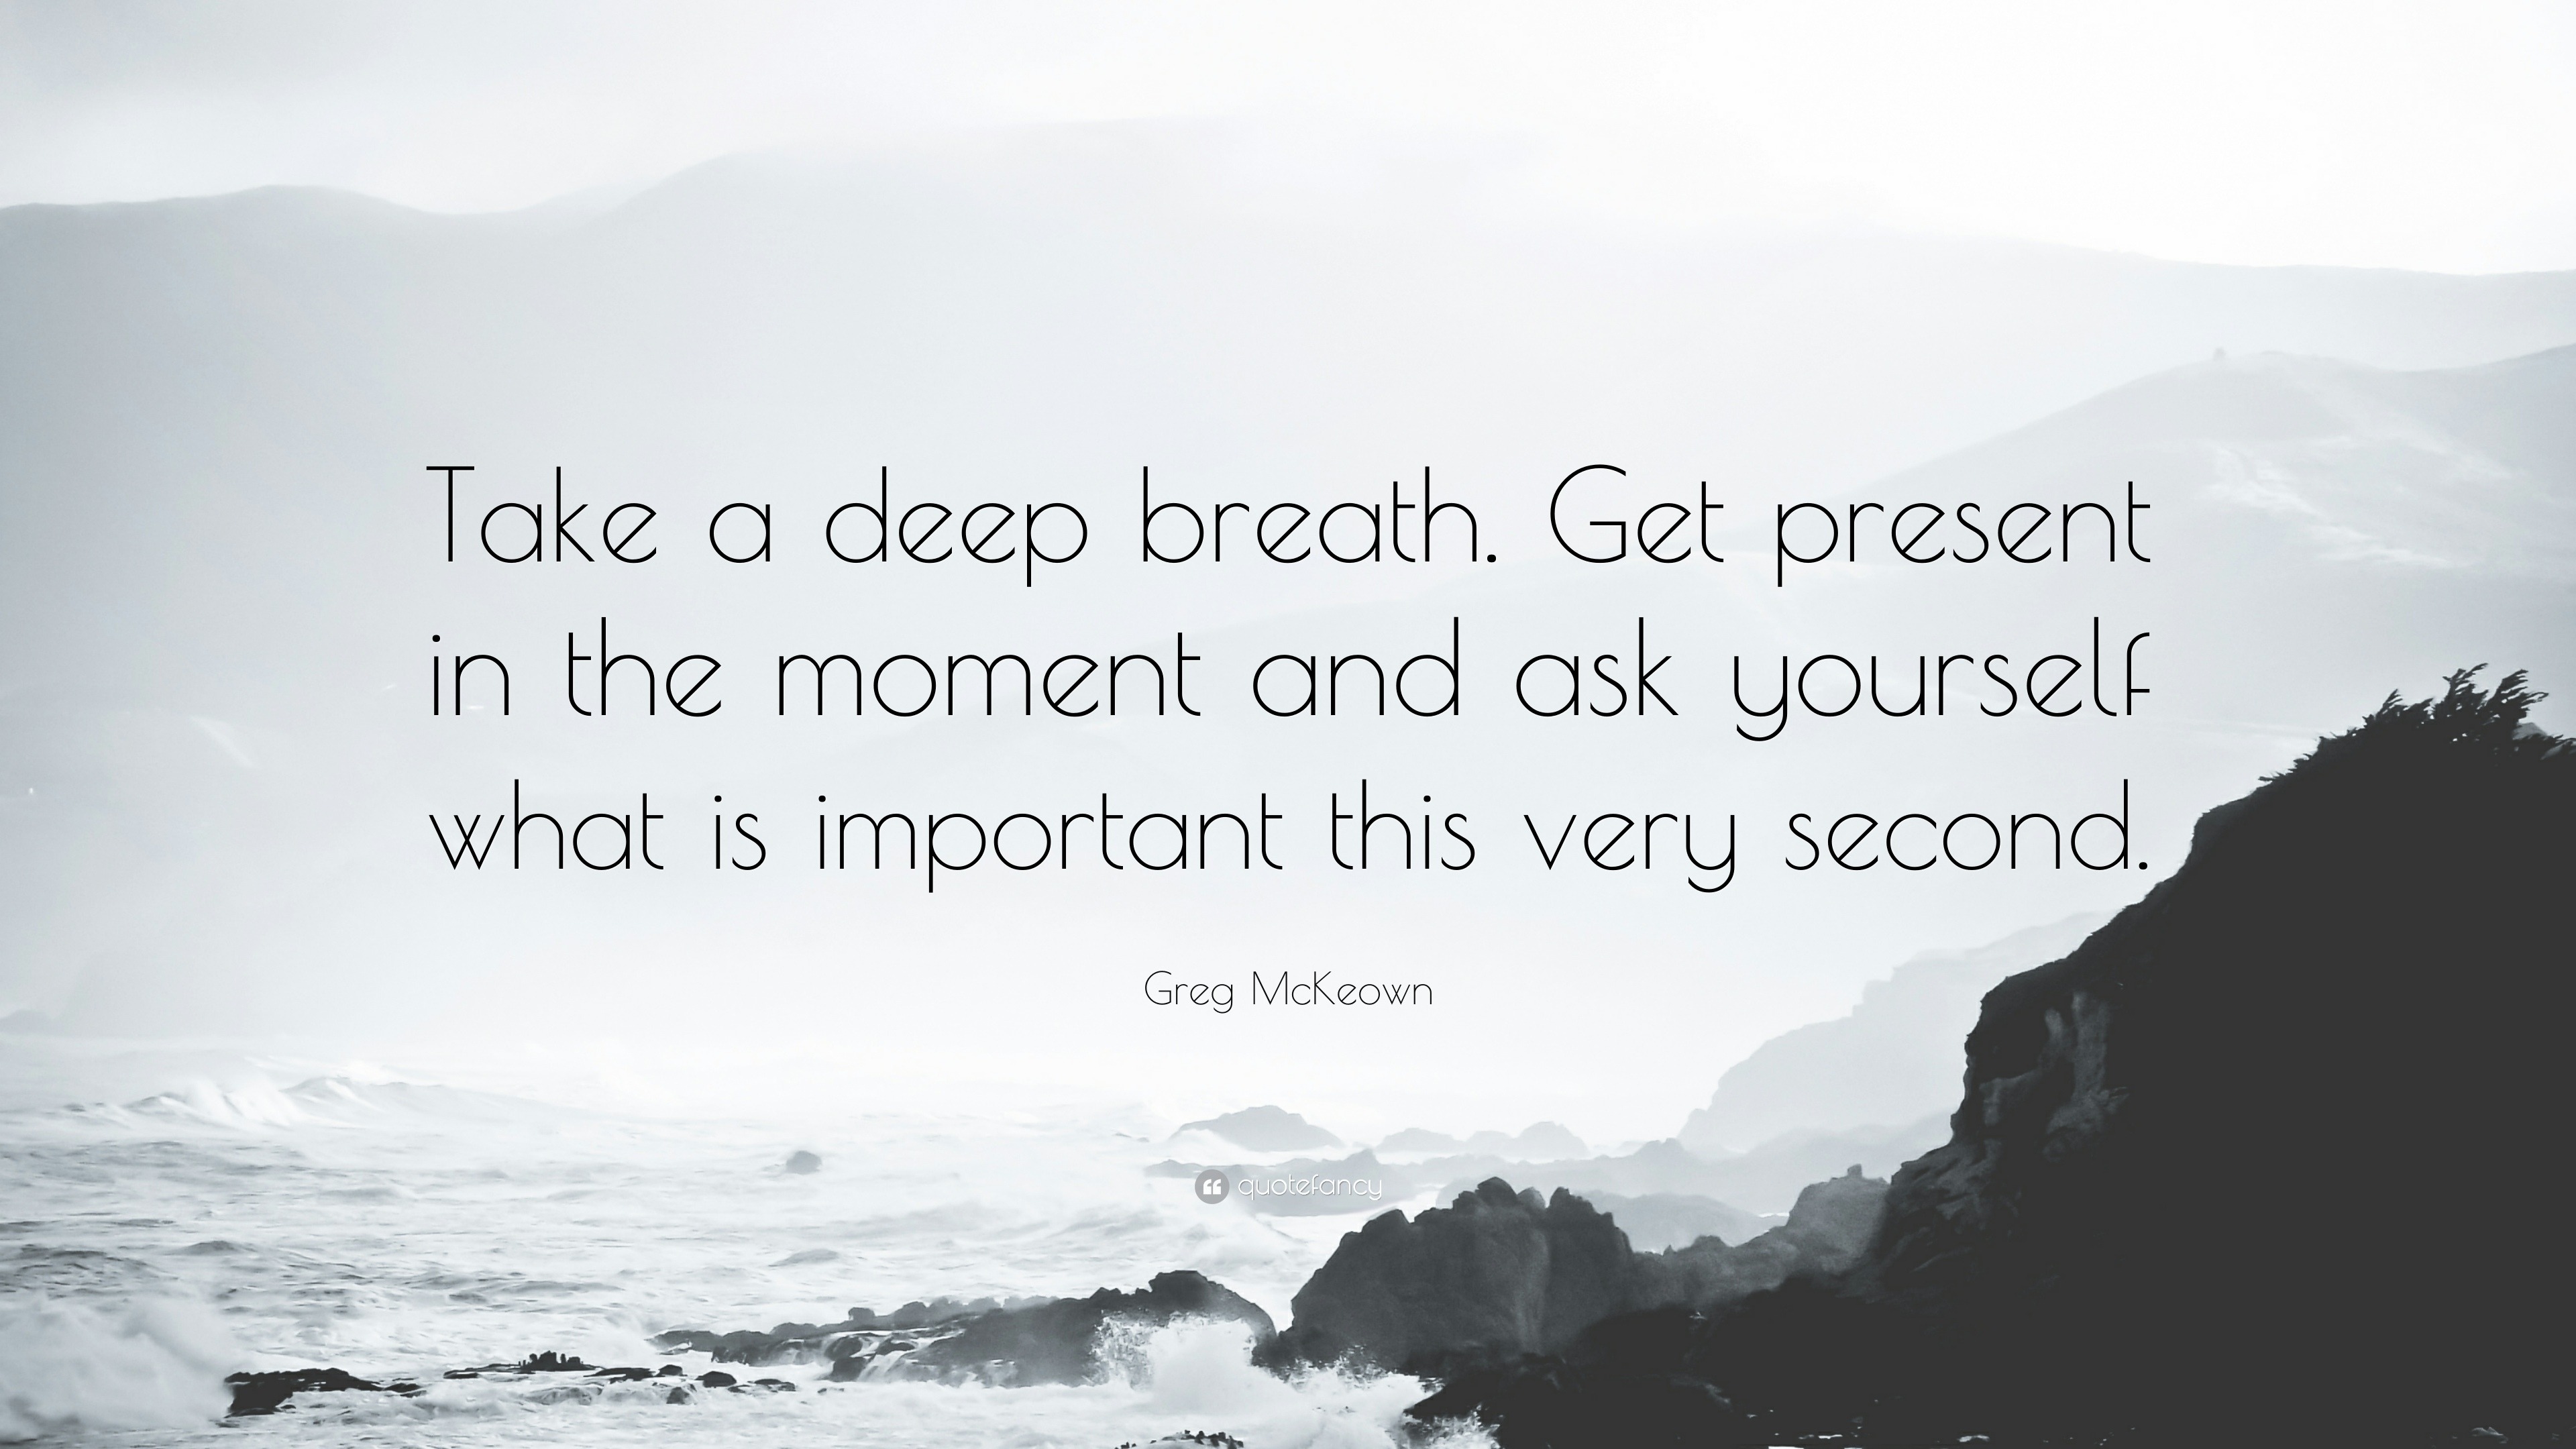 Greg McKeown Quote: “Take a deep breath. Get present in the moment and